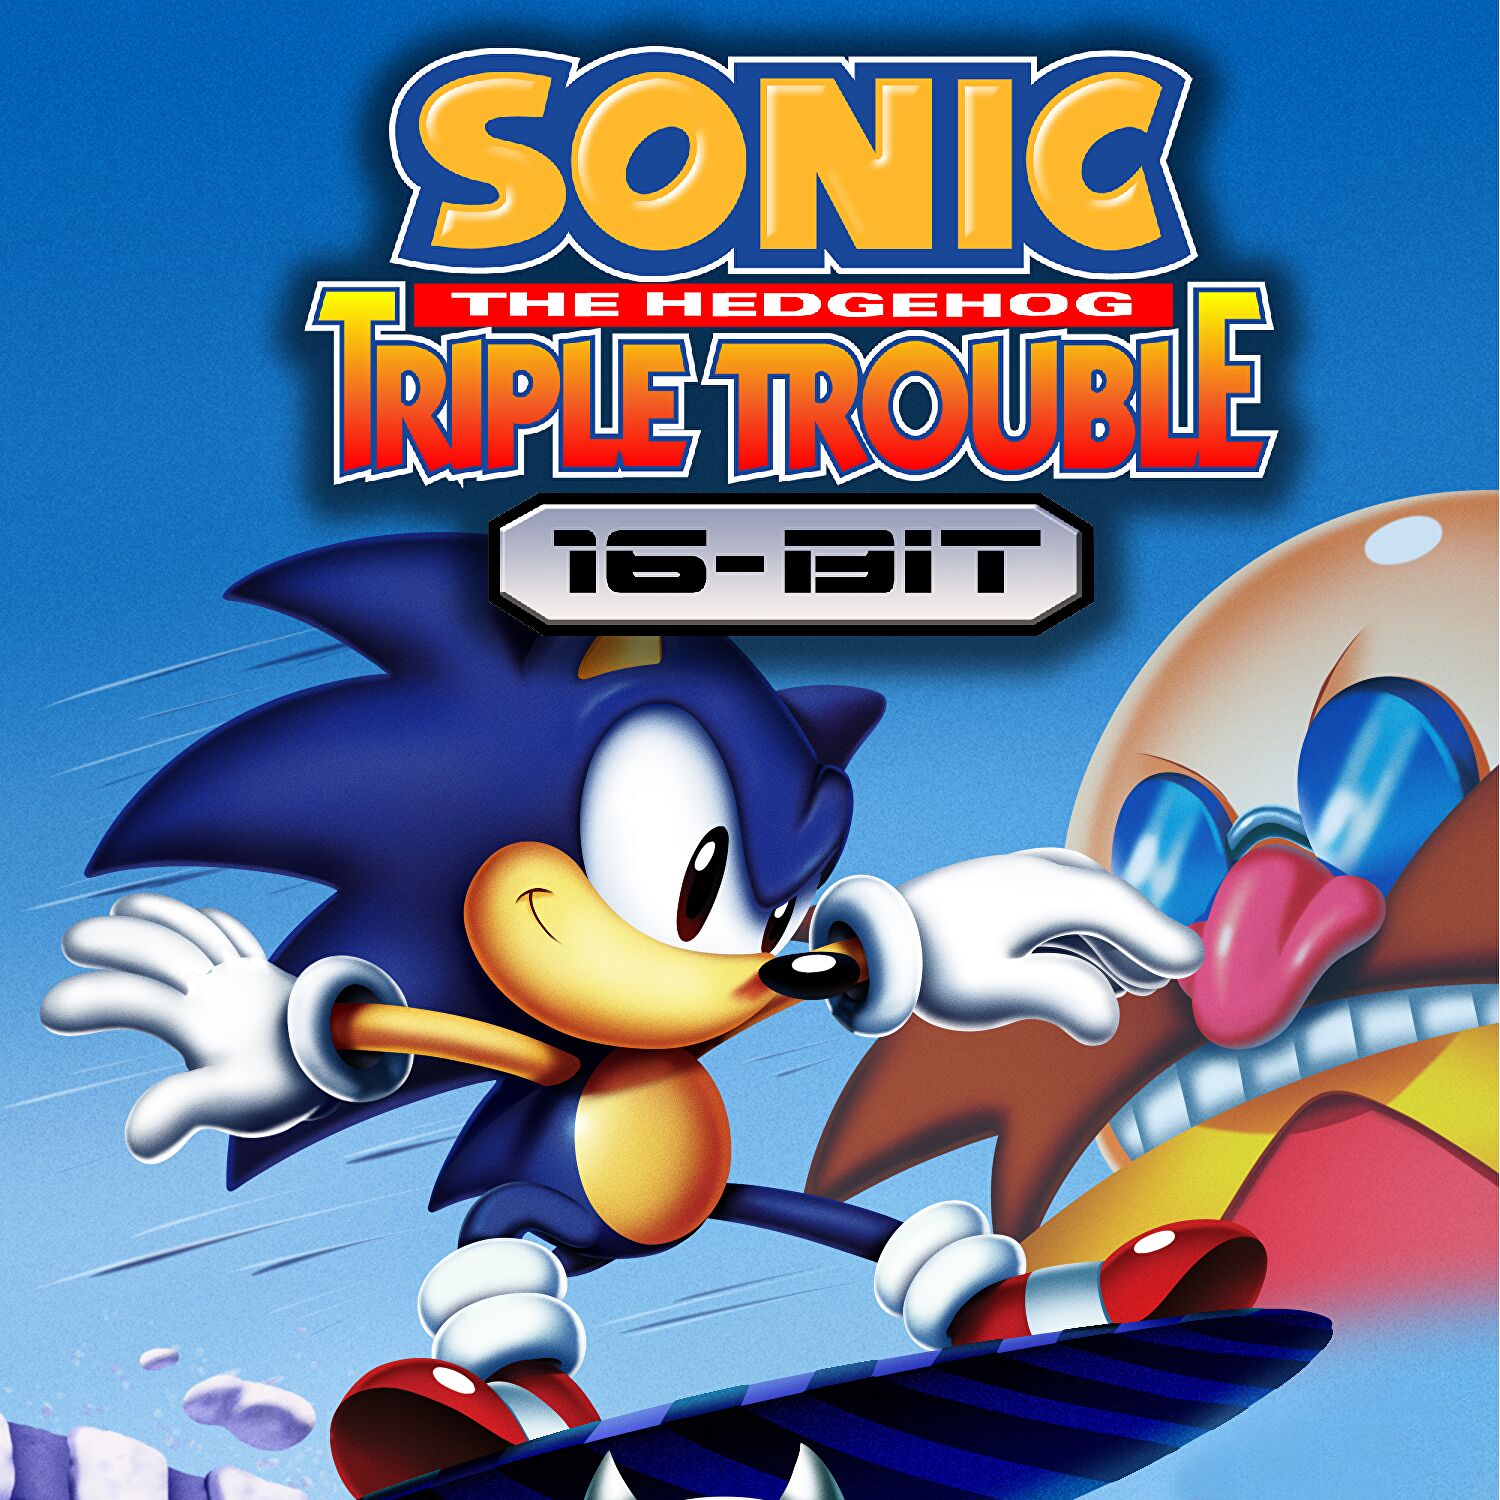 For Anyone Who Saw The Thread Where Op Taped Sonic - 16 Bit Sonic